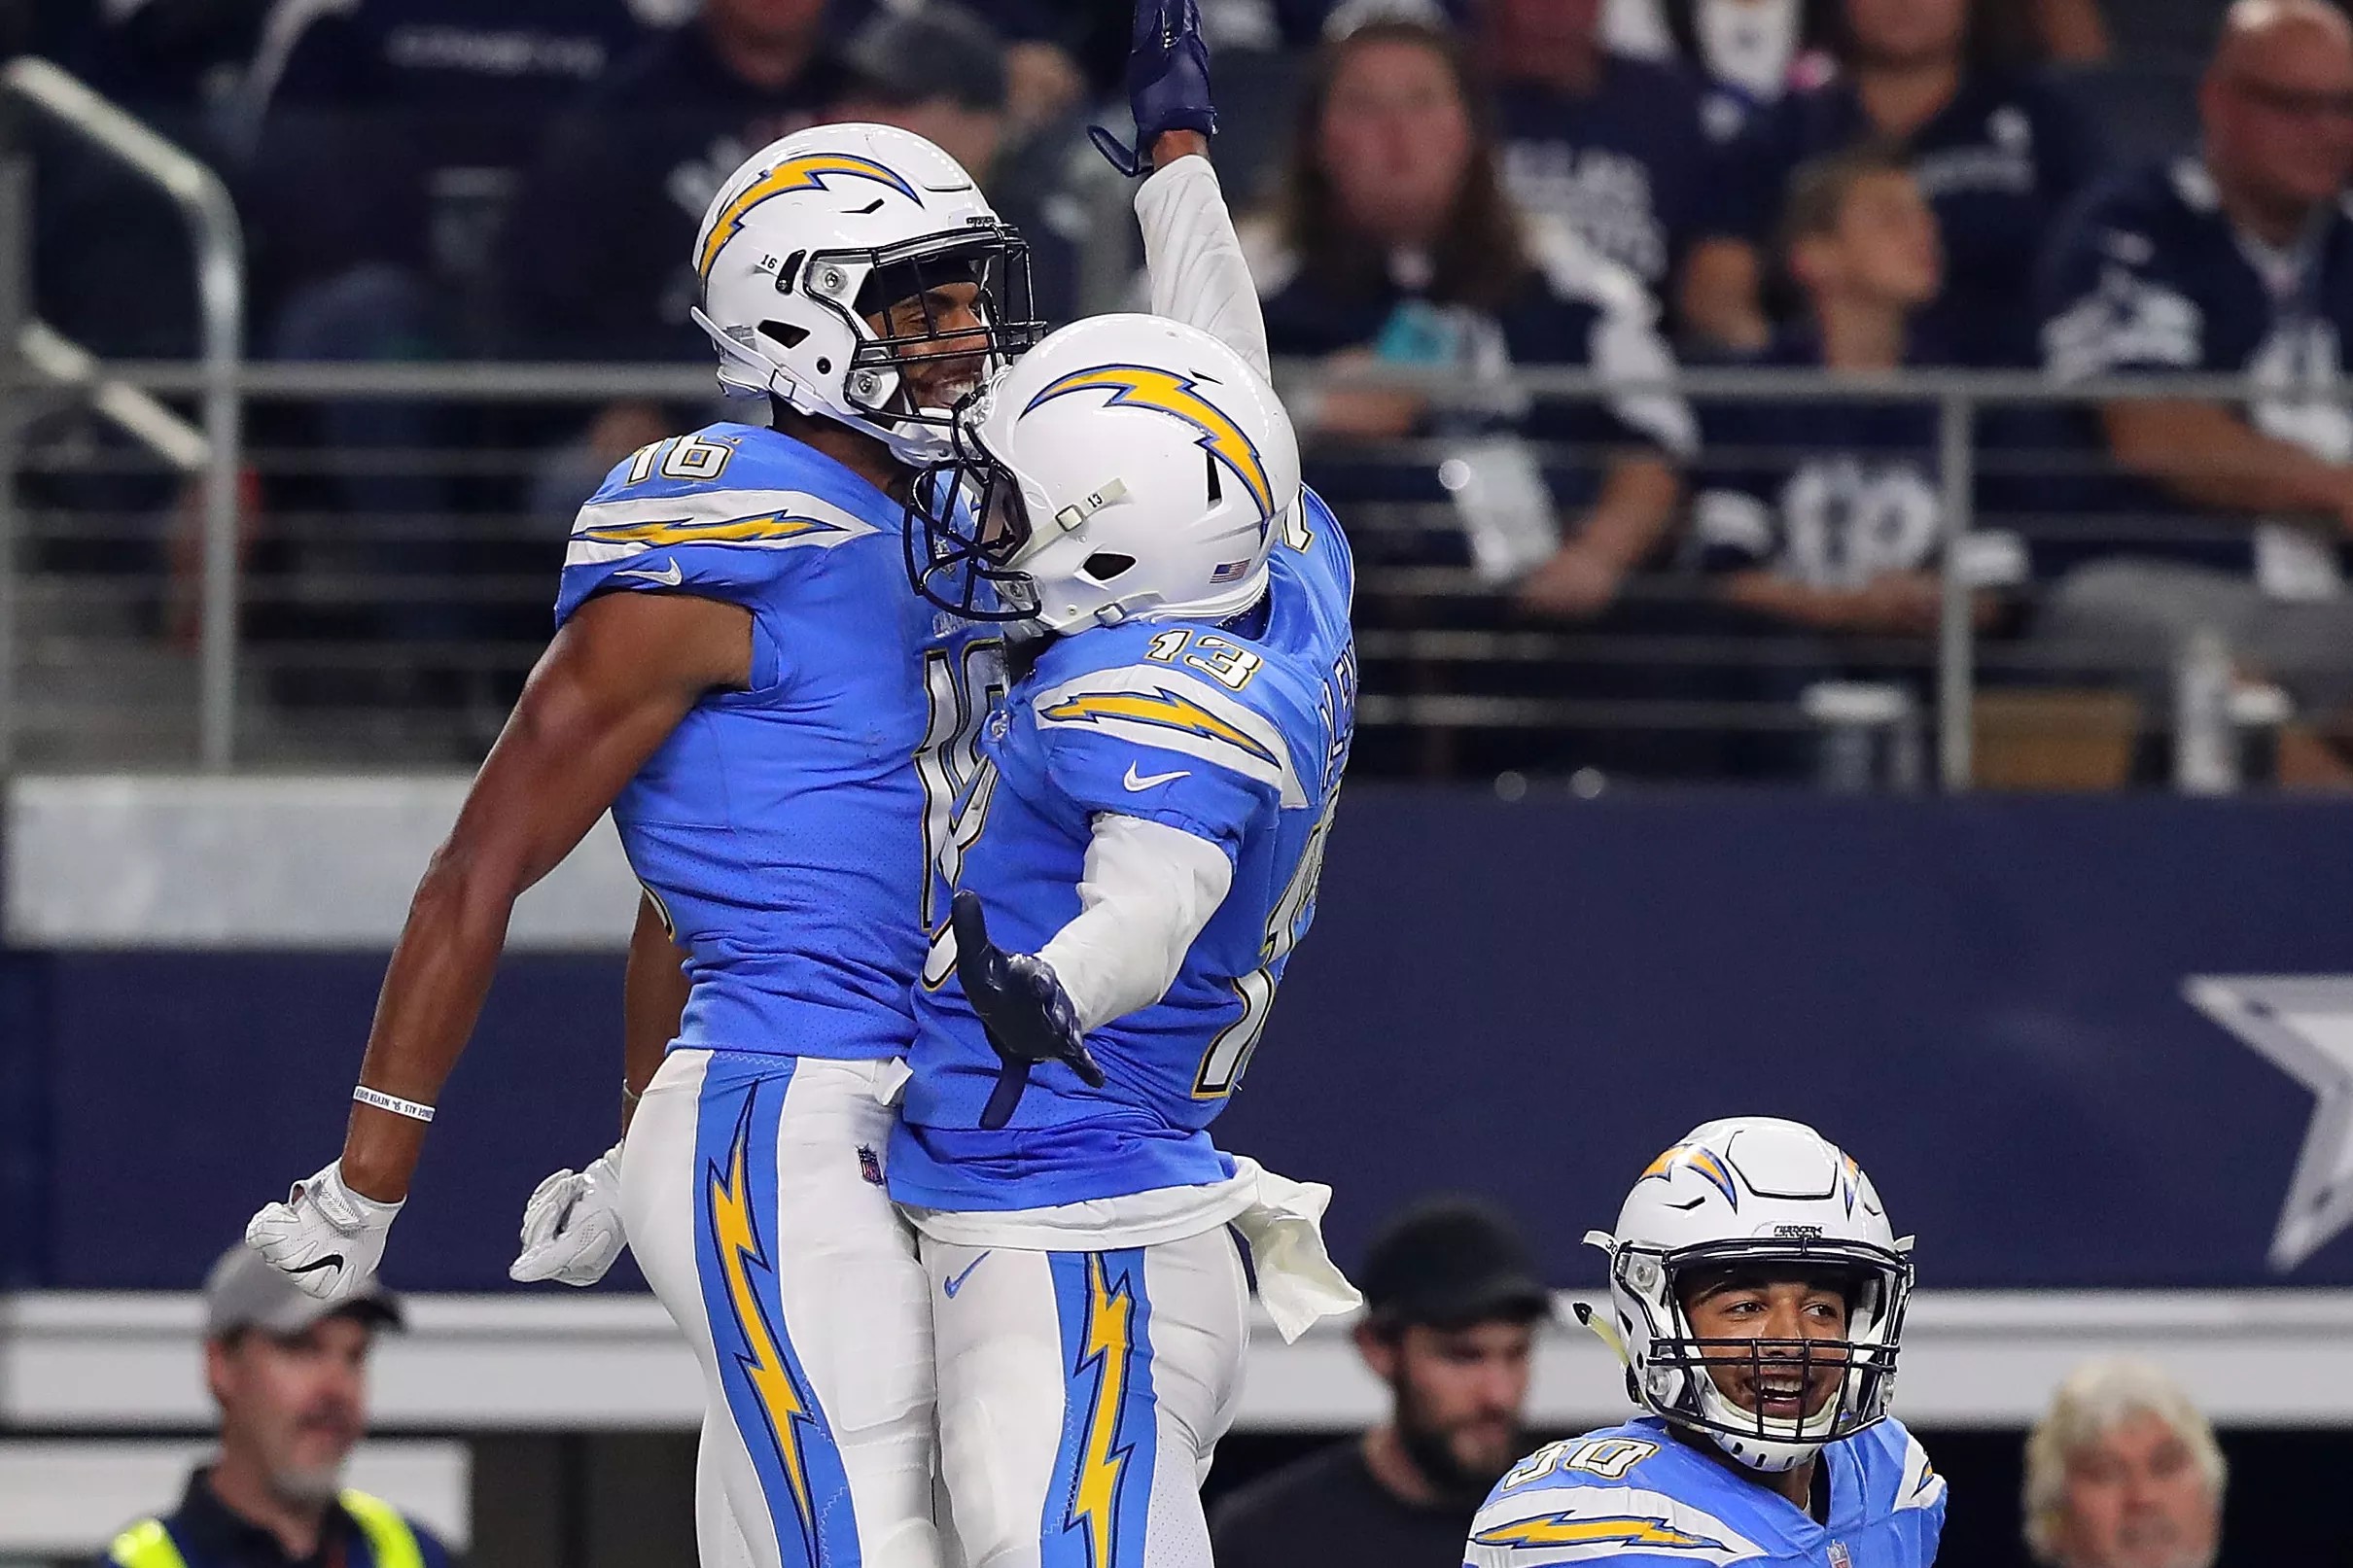 ChargersCowboys Final Score Chargers Defeat the Cowboys 286